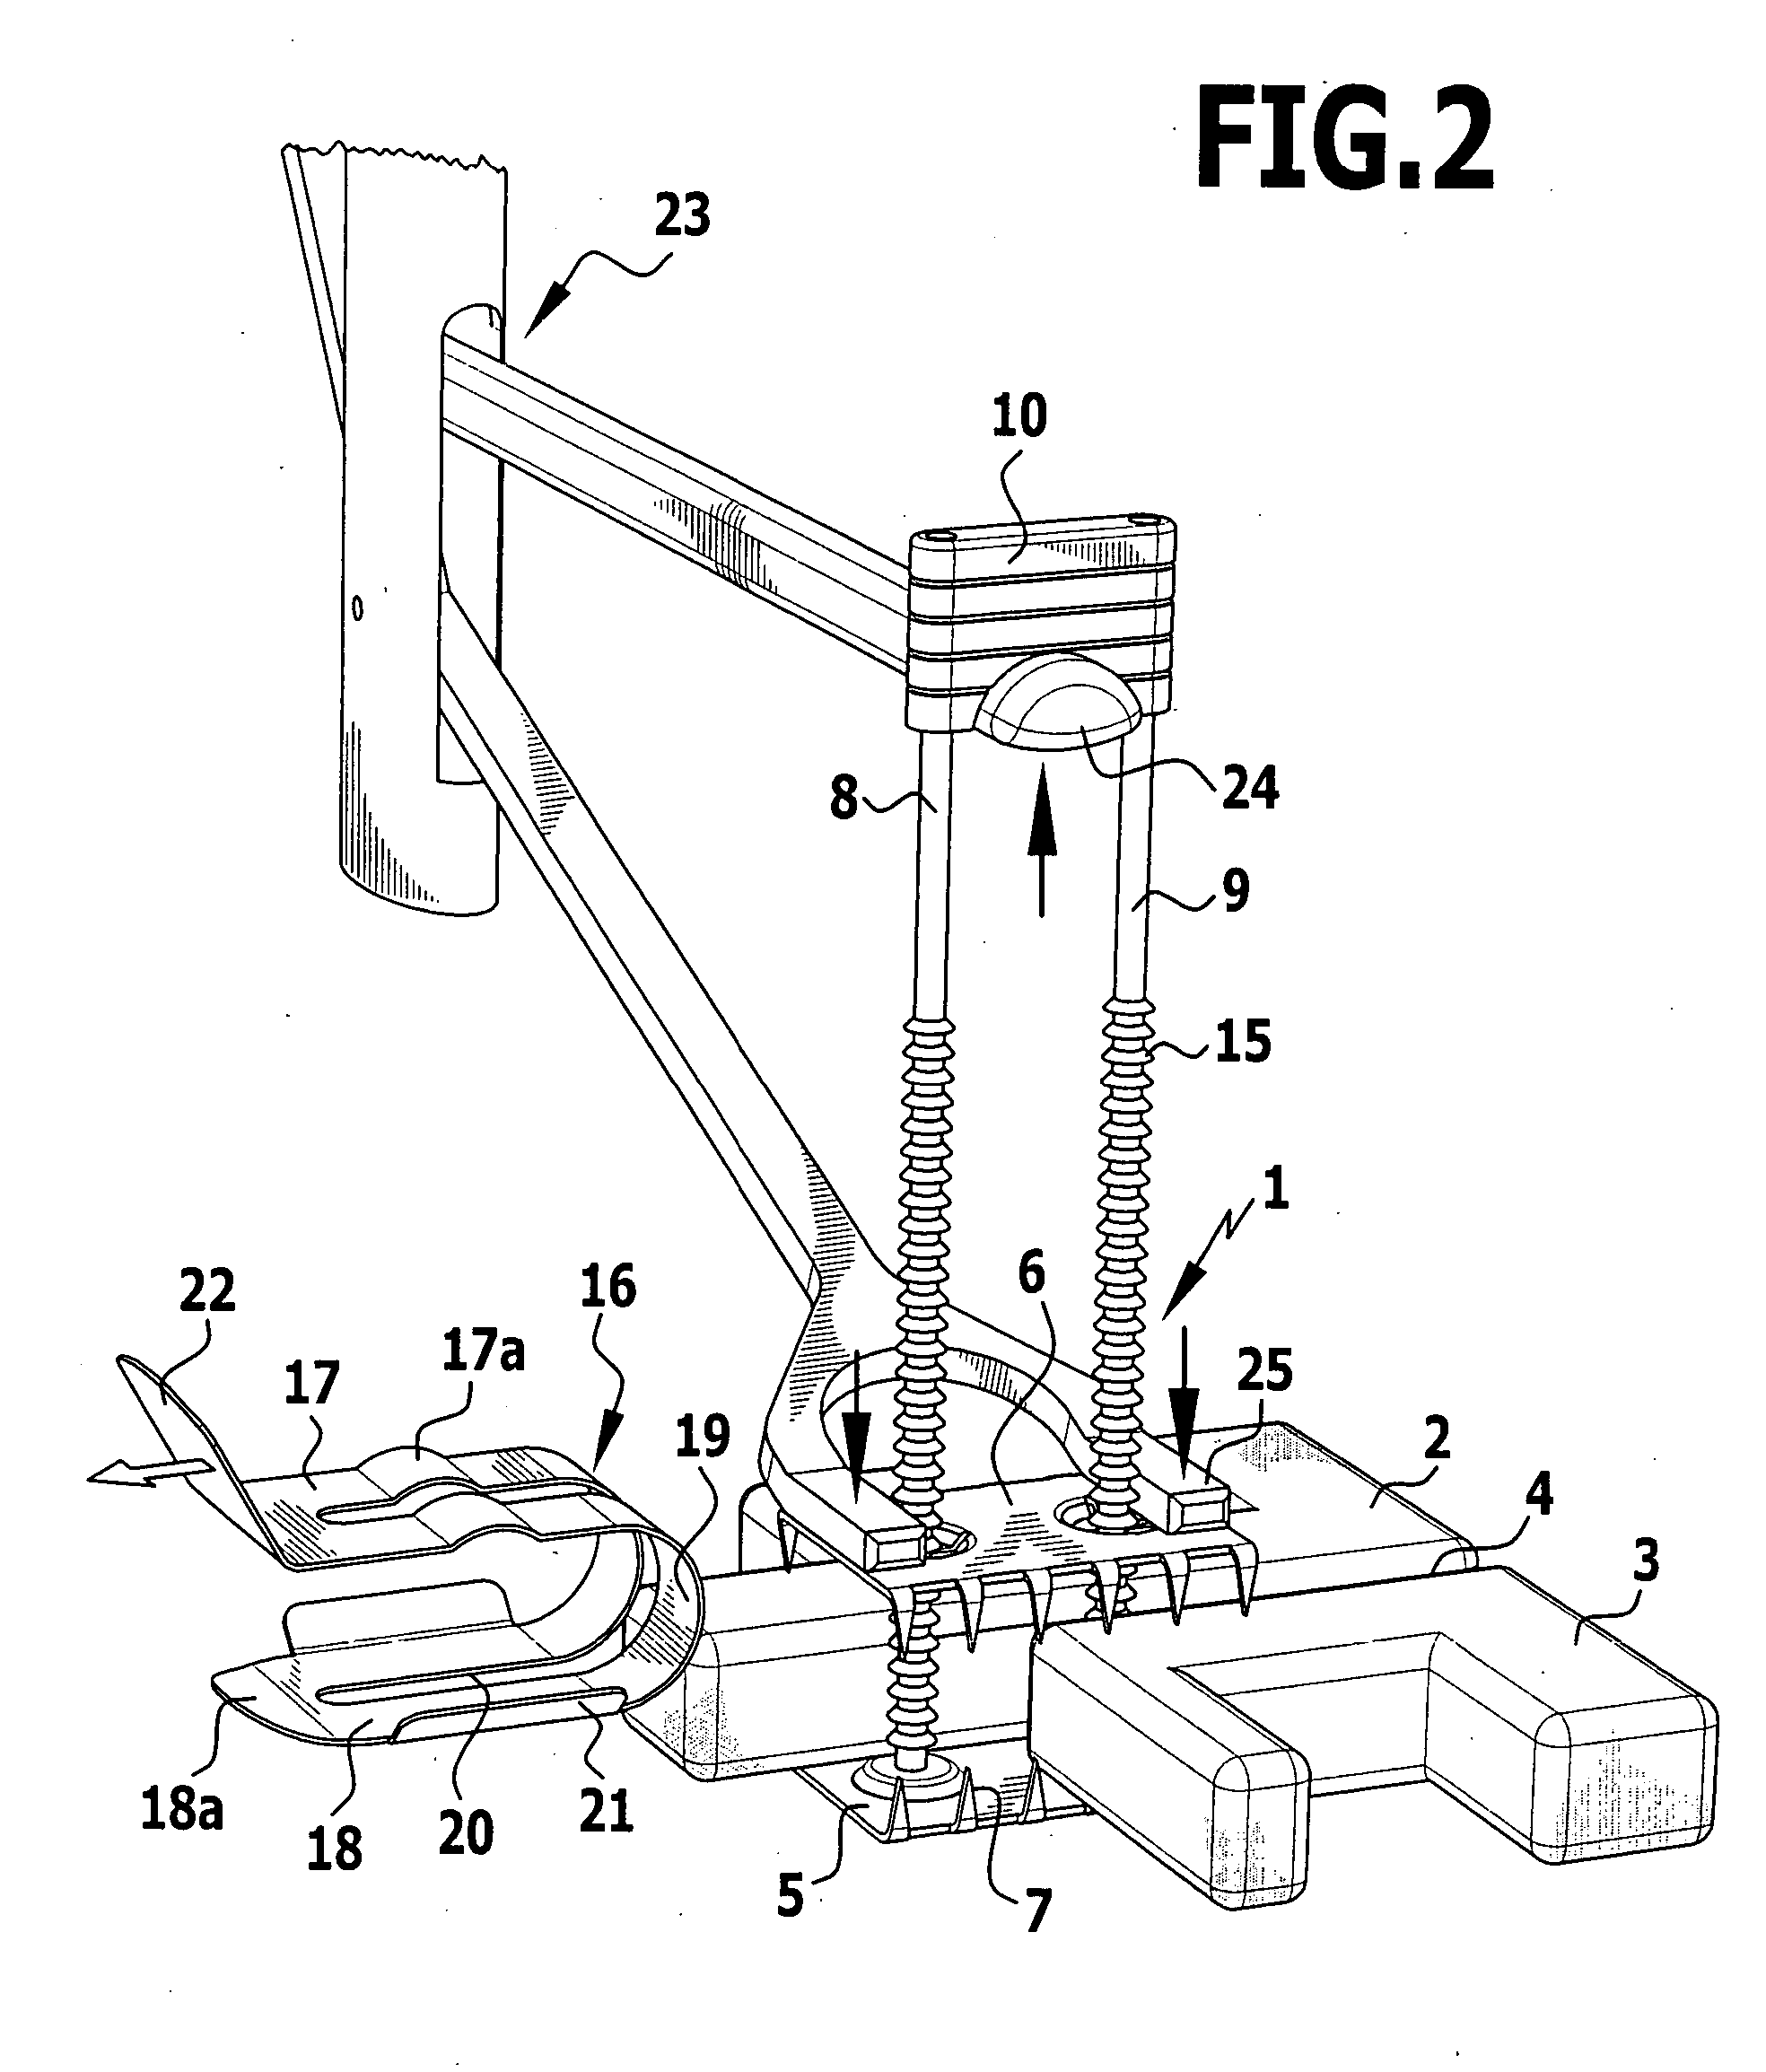 Surgical fixing device for two bone parts